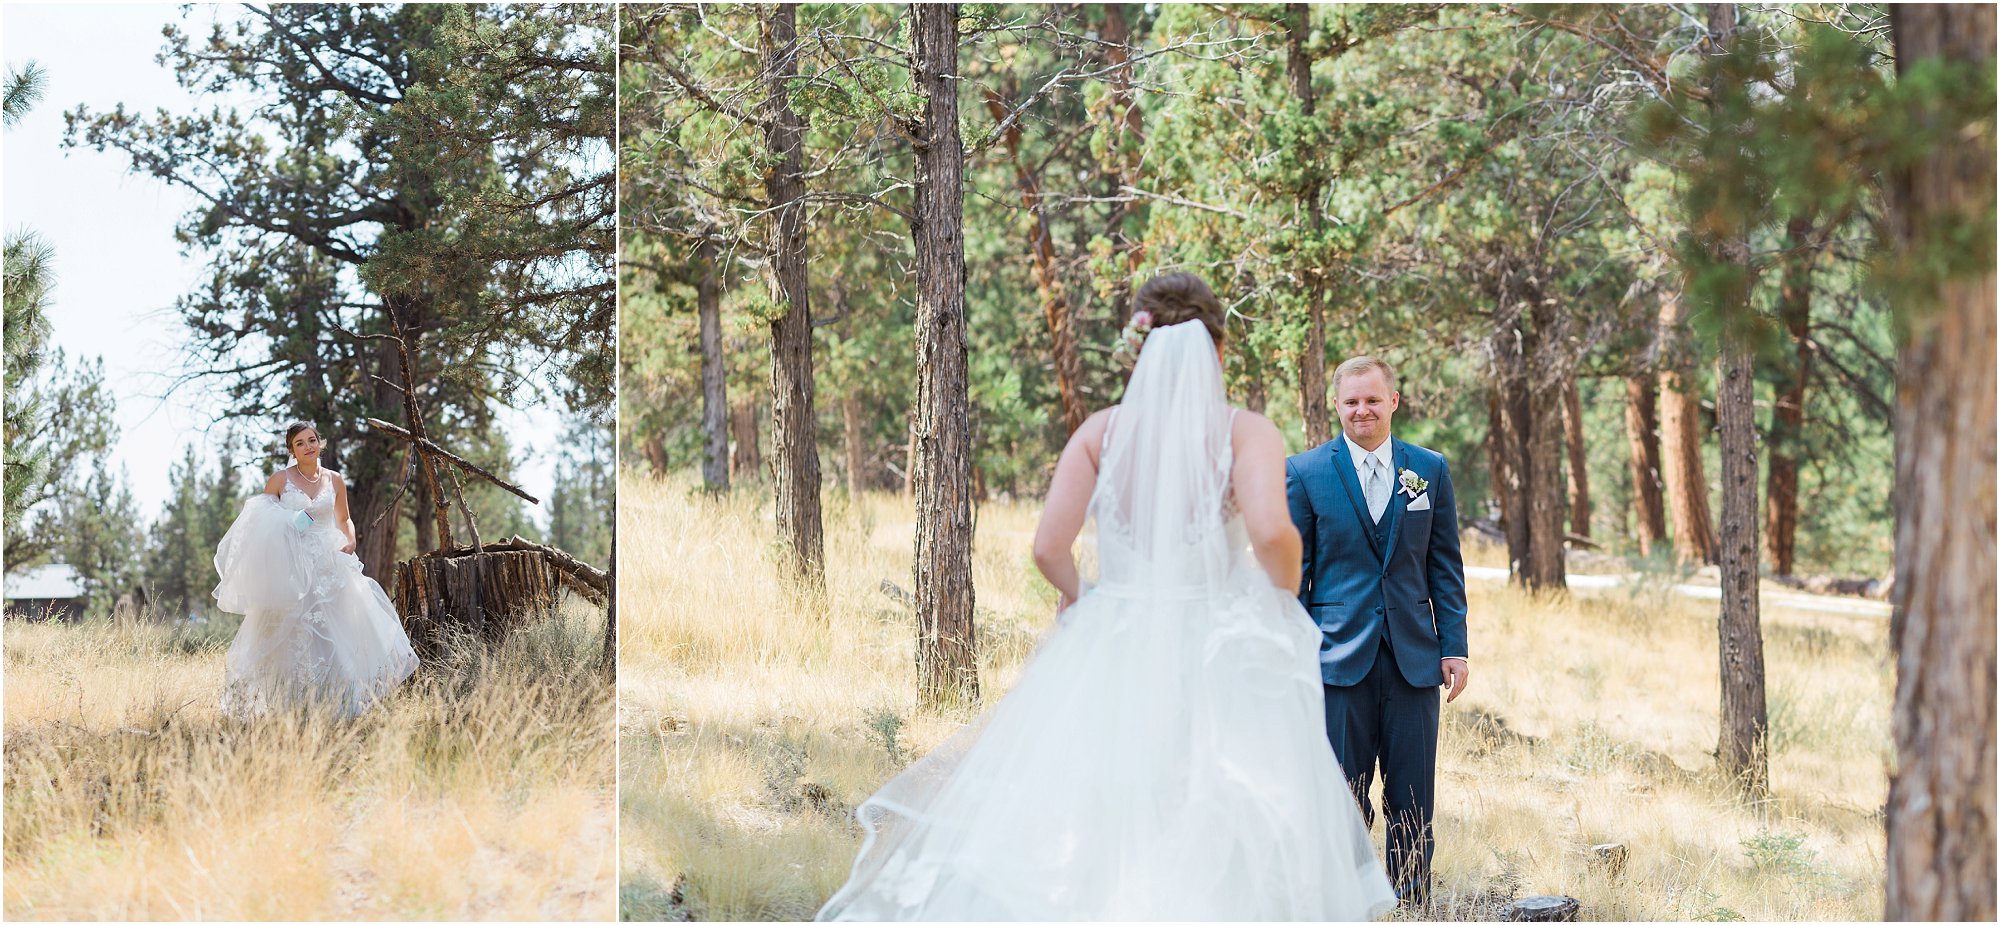 A couple has their first look before their wedding ceremony at the gorgeous Rock Springs Ranch in Bend, OR. | Erica Swantek Photography